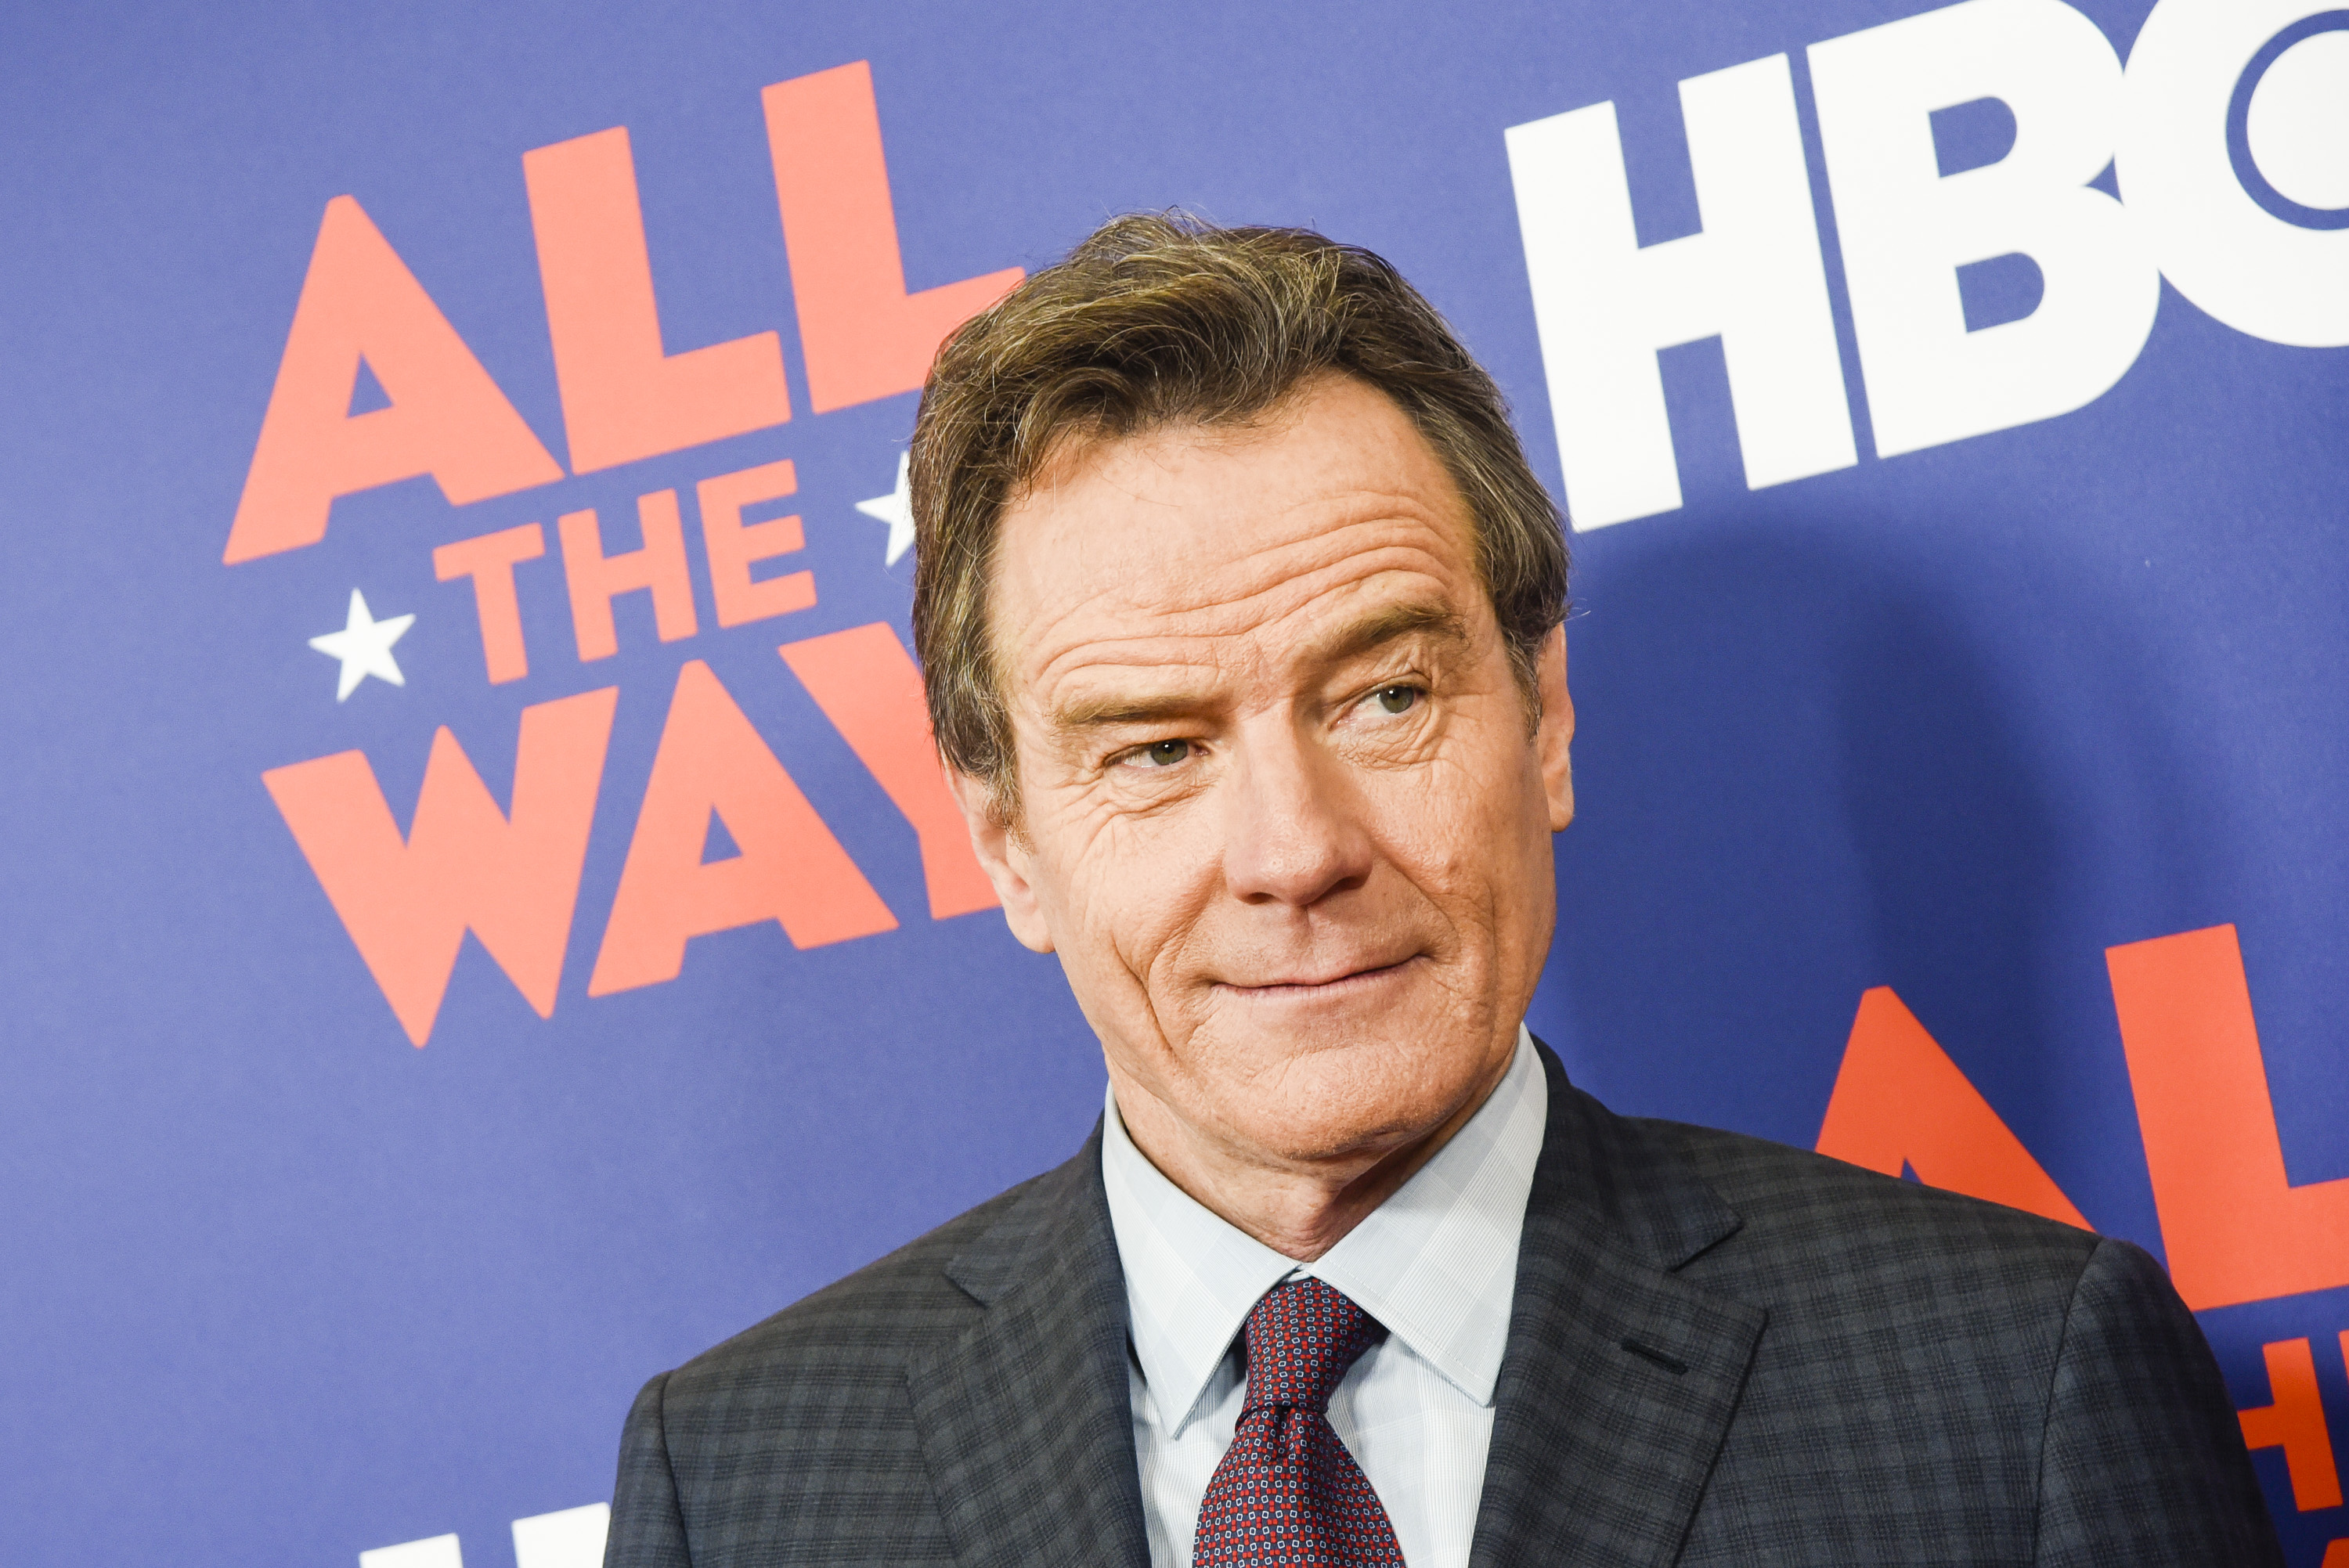 Actor Bryan Cranston poses for photographers during HBO's "All The Way" Washington, DC Screening at The National Archives in Washington, D.C., on May 16, 2016.